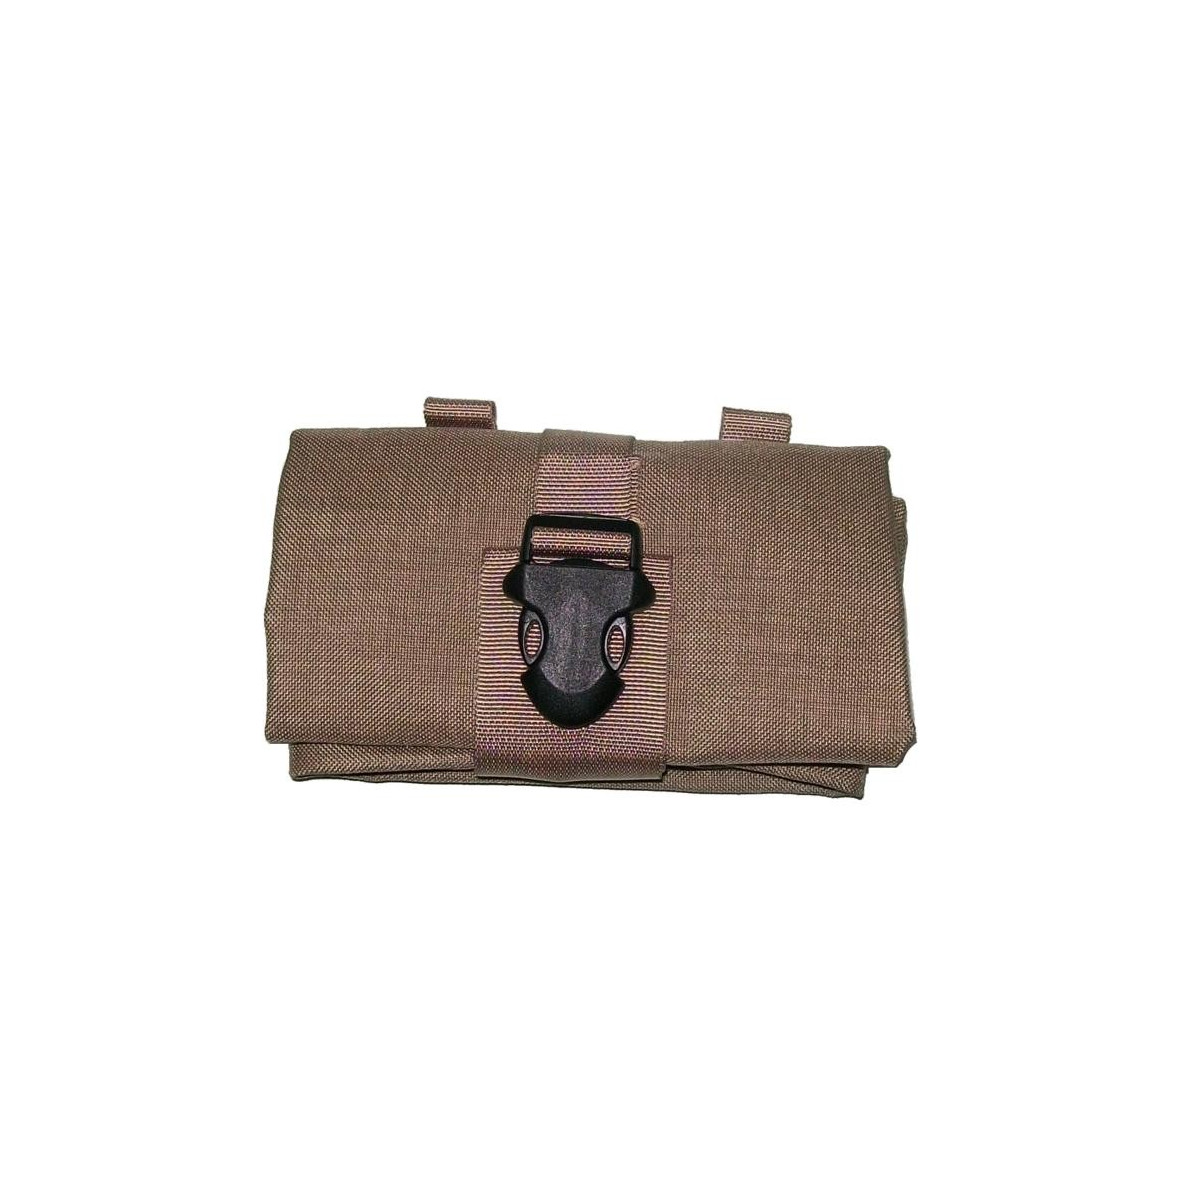 Molle Dump Pouch 5 liters for ammunition and magazines